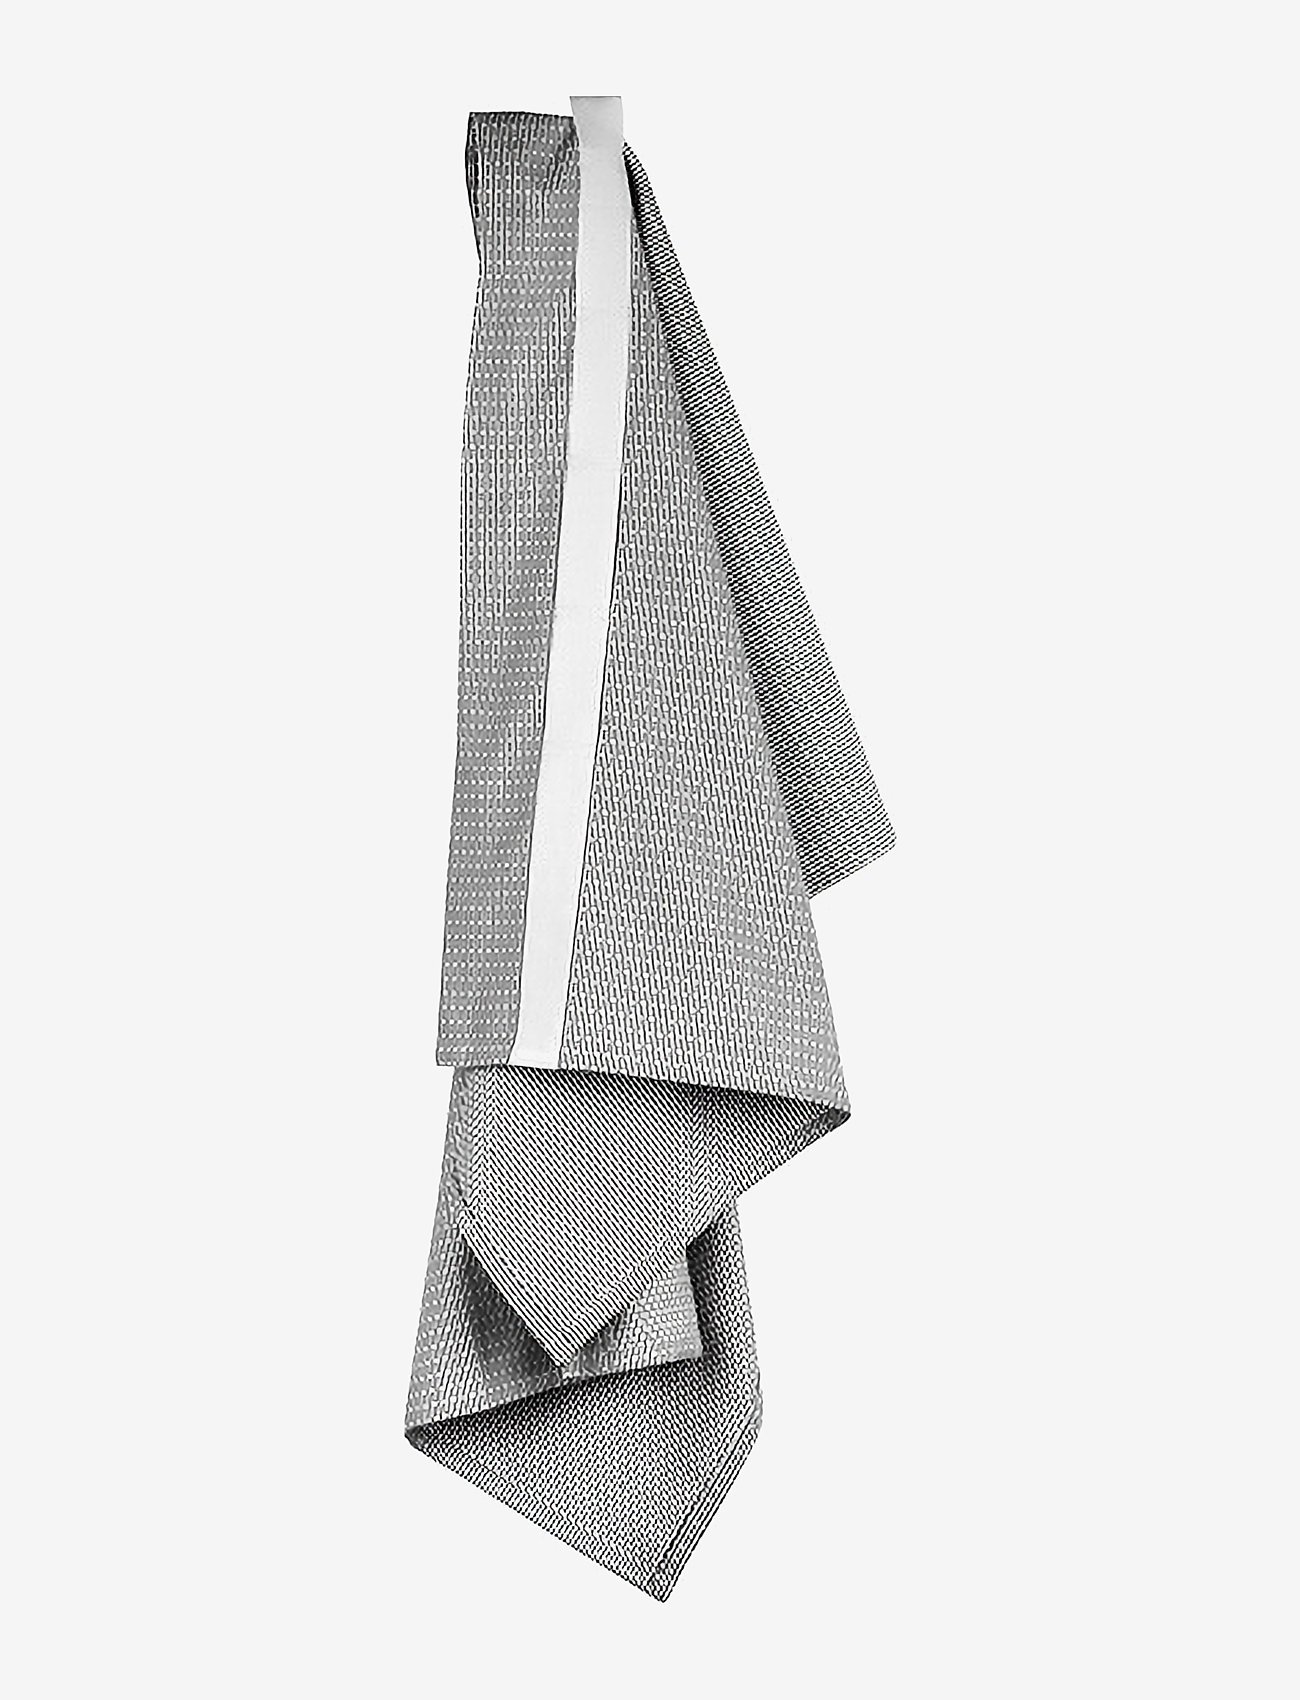 The Organic Company - Towel to Wrap Around You - home - 180 morning grey - 1